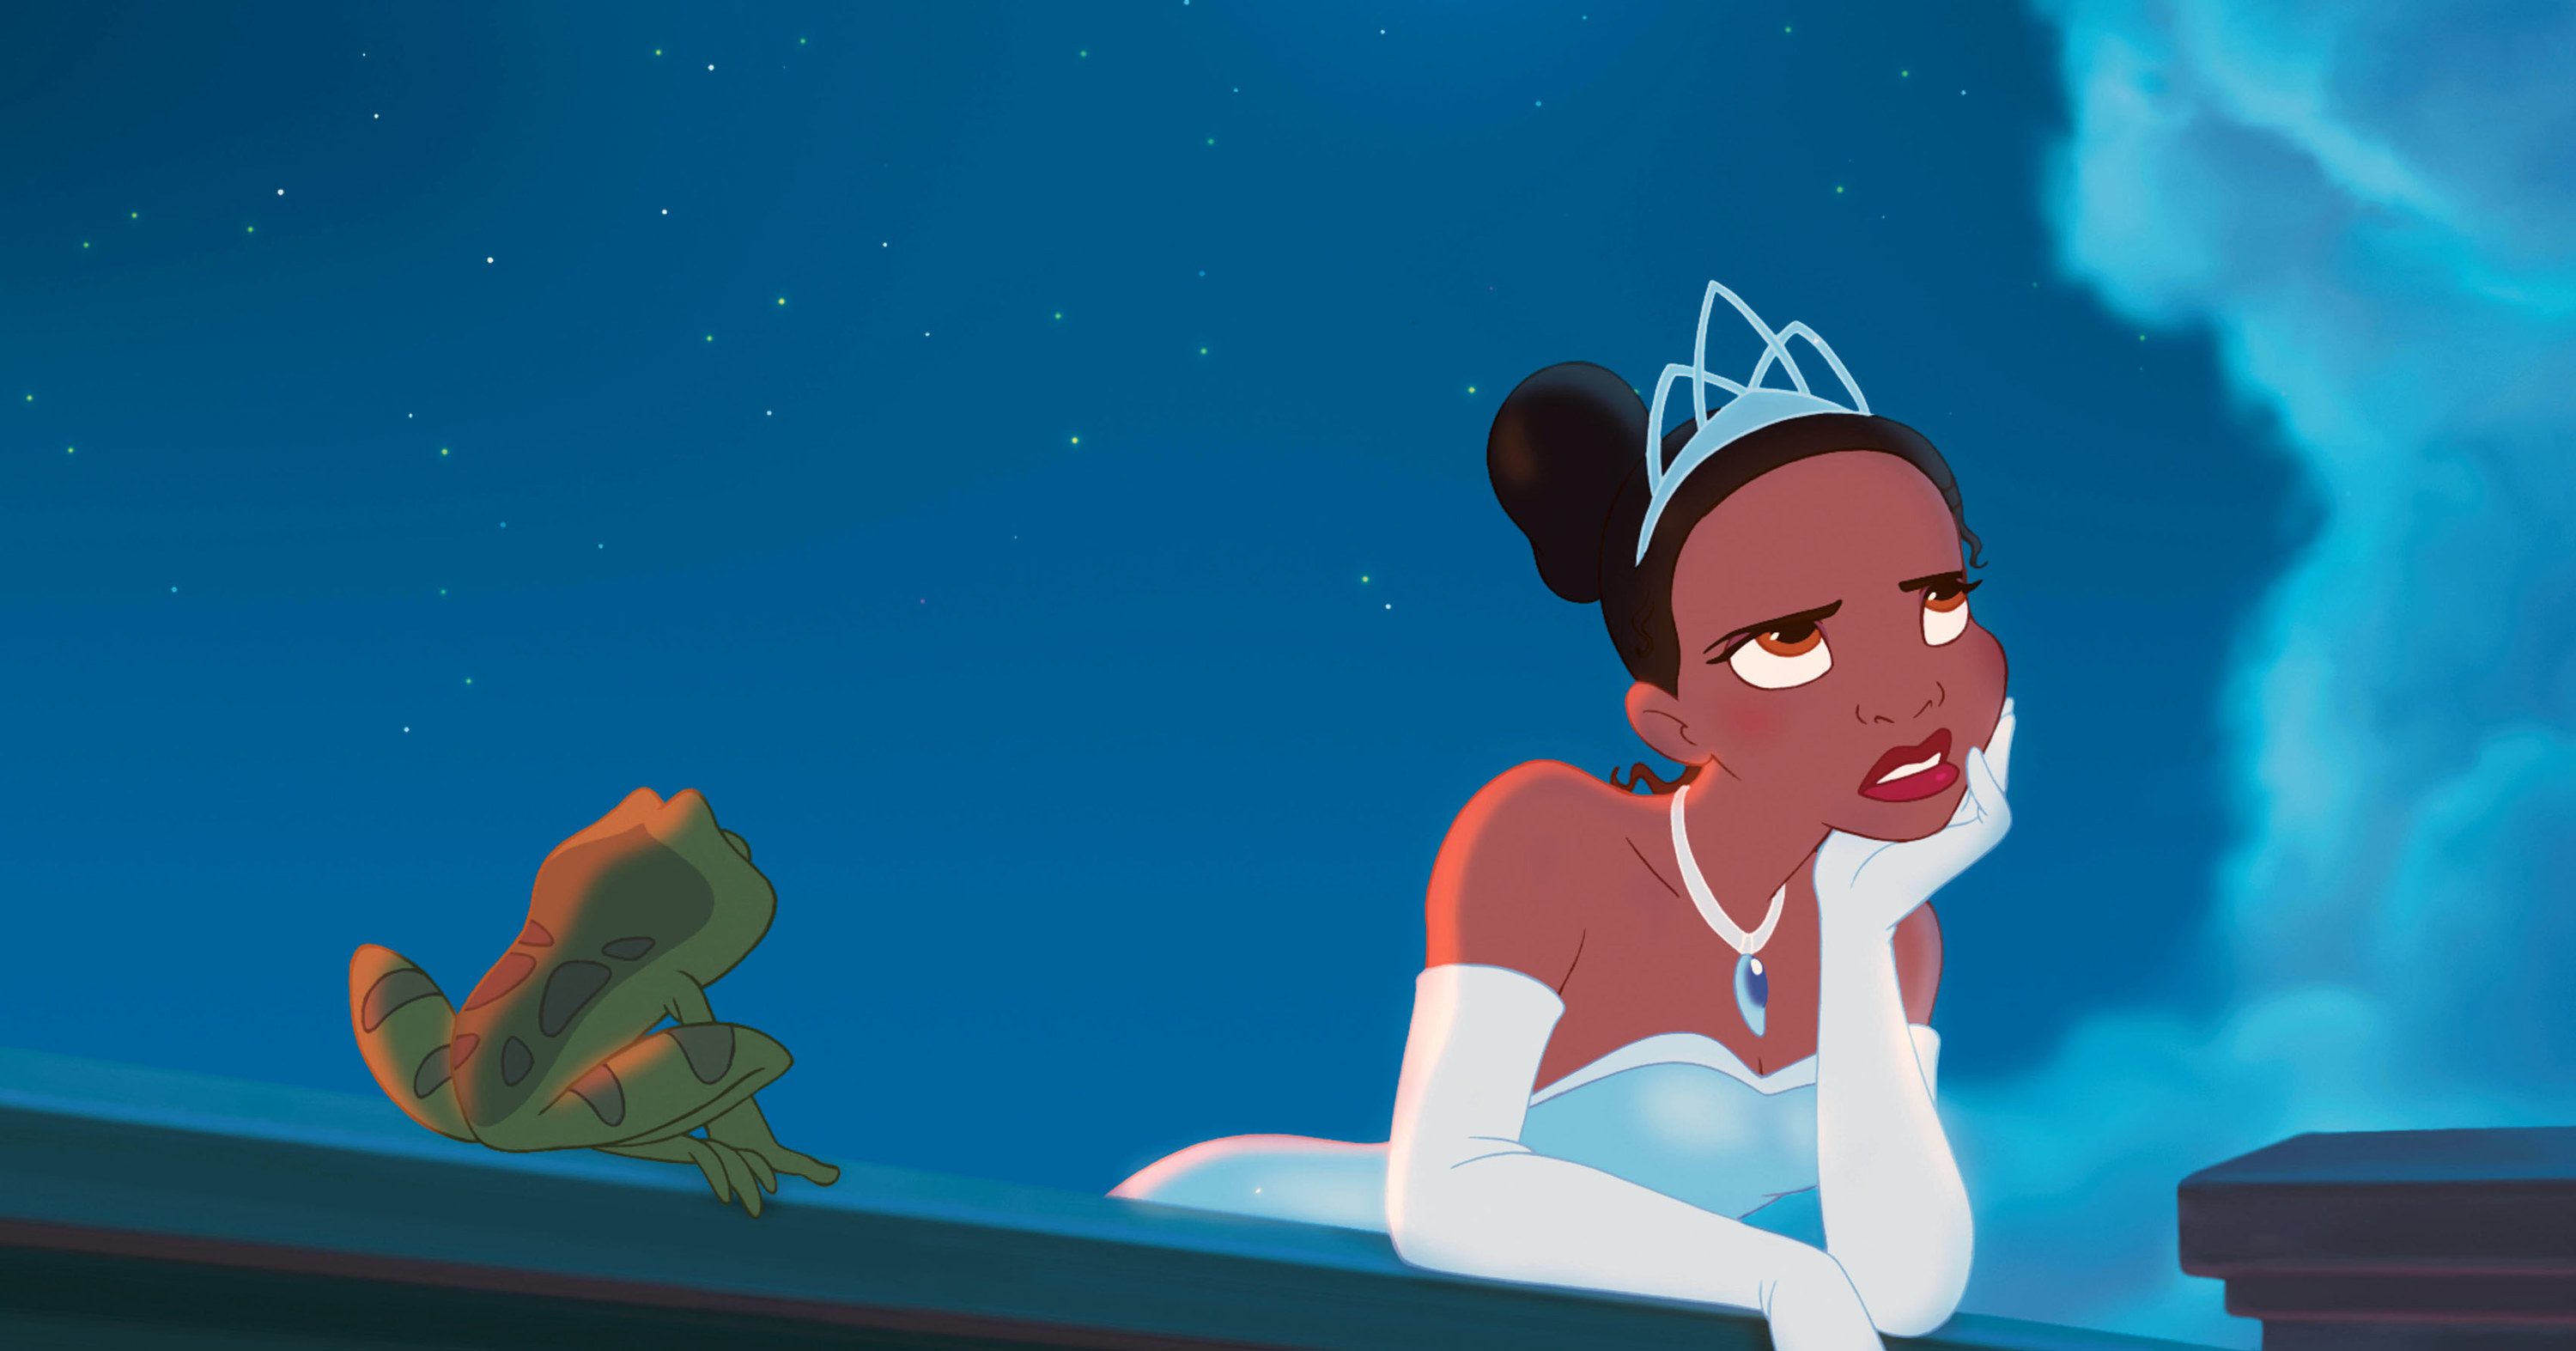 Screenshot from &quot;The Princess and the Frog&quot;